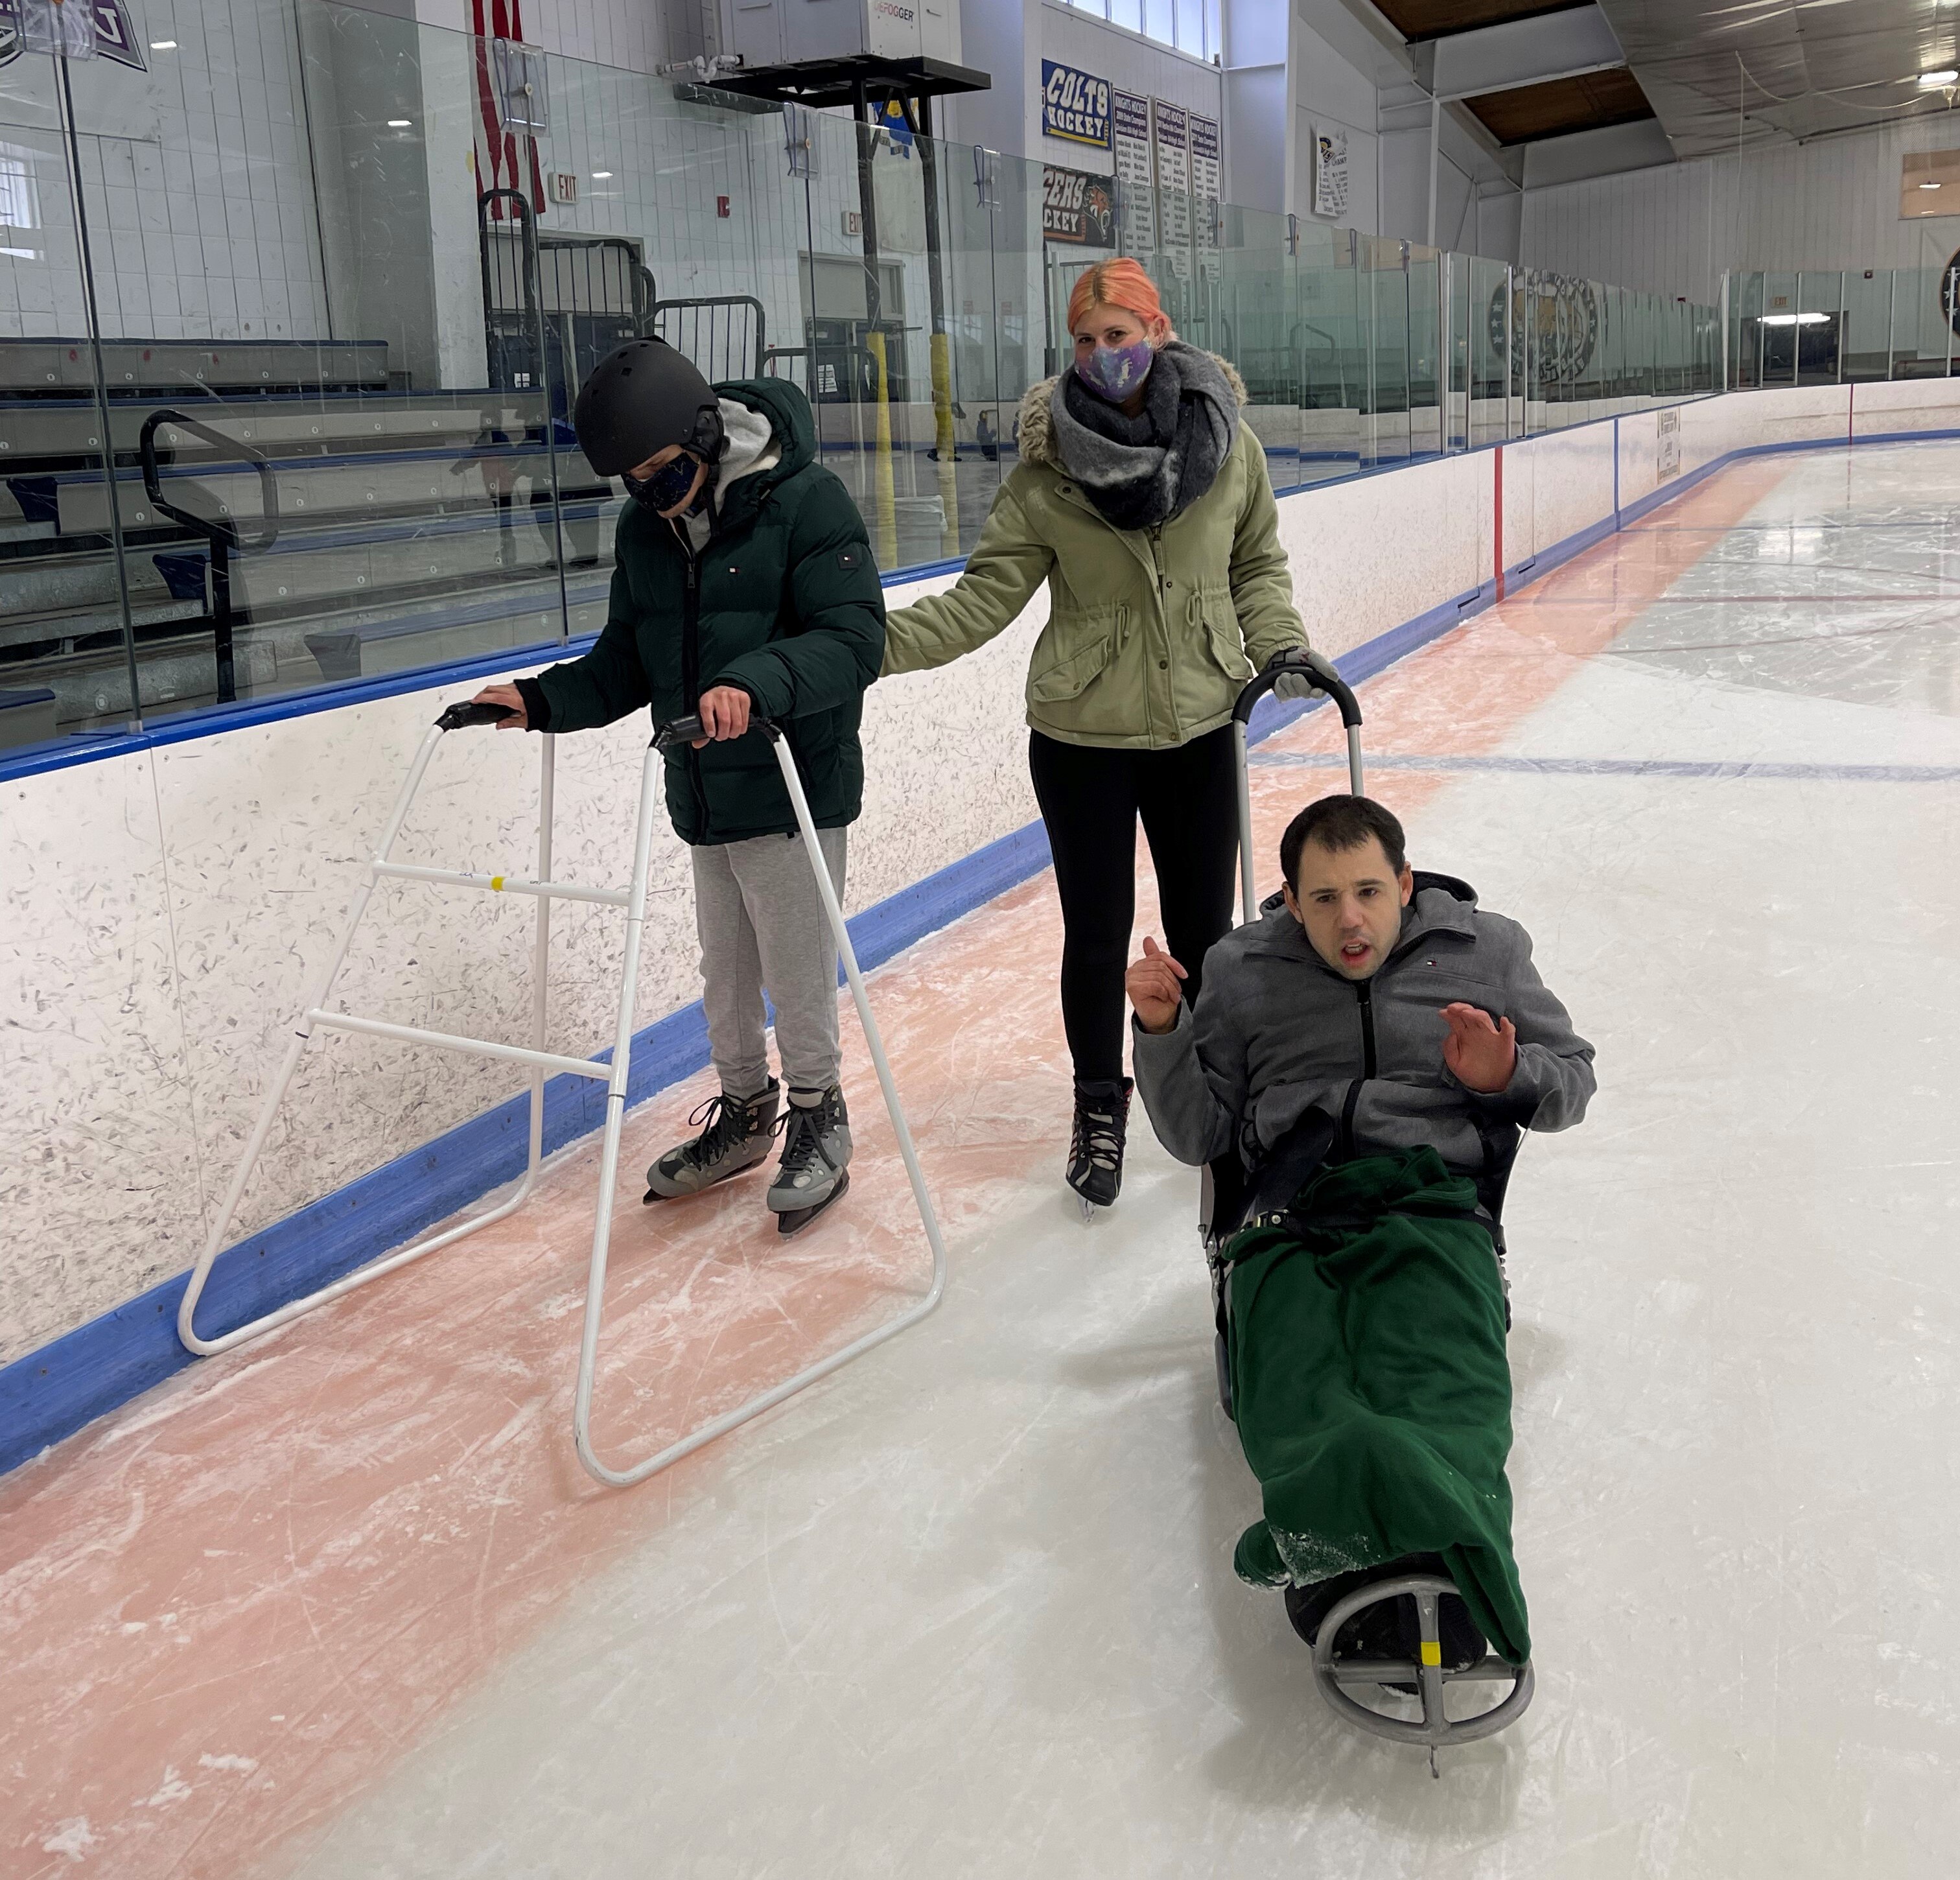 Three people ice skating at an indoor rink. One is on ice skates and pushing a sled. Another skating on a ice sled looking at the camera. The third ice skating using conventional skates and a walker. 